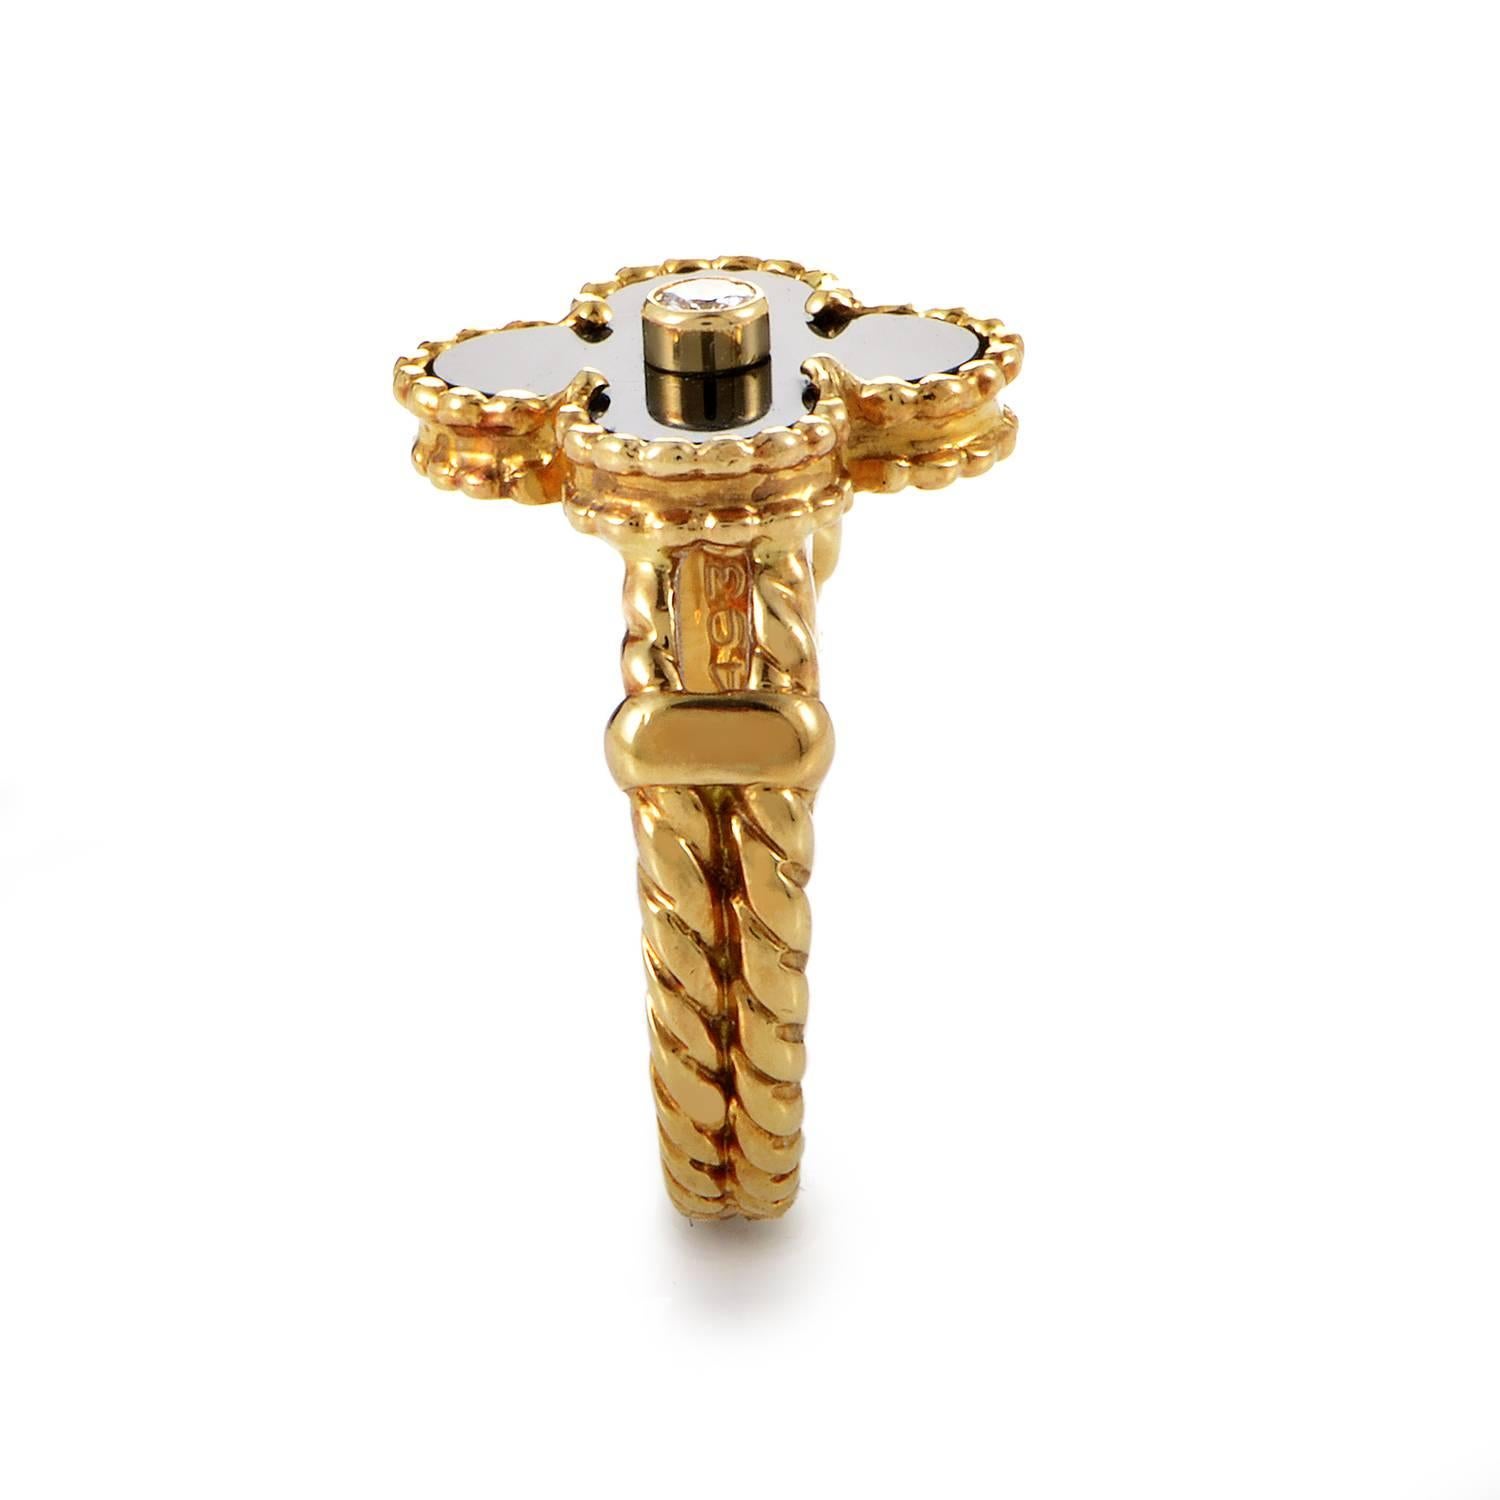 Round Cut Van Cleef & Arpels Alhambra Diamond and Onyx Gold Ring